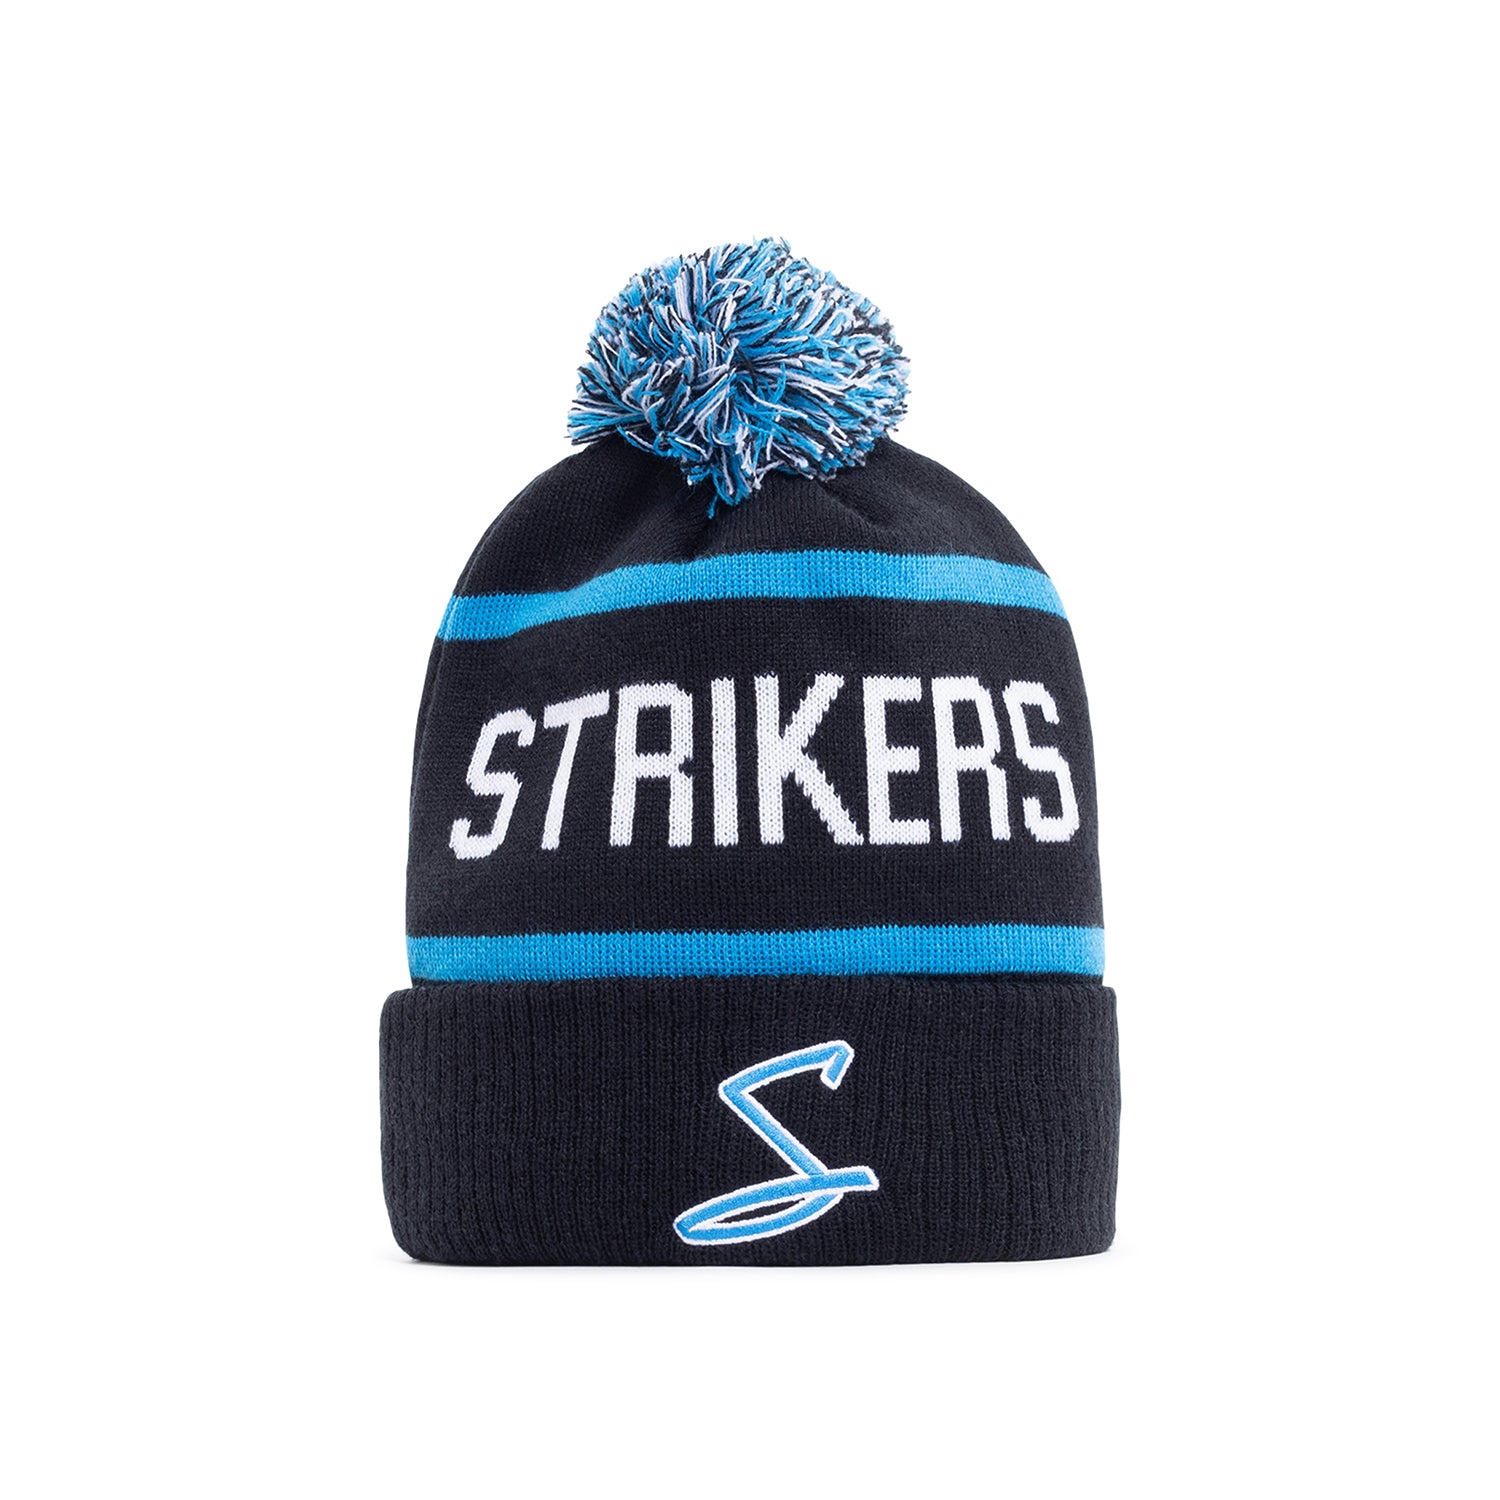 Adelaide Strikers Gear – The Official Cricket Shop